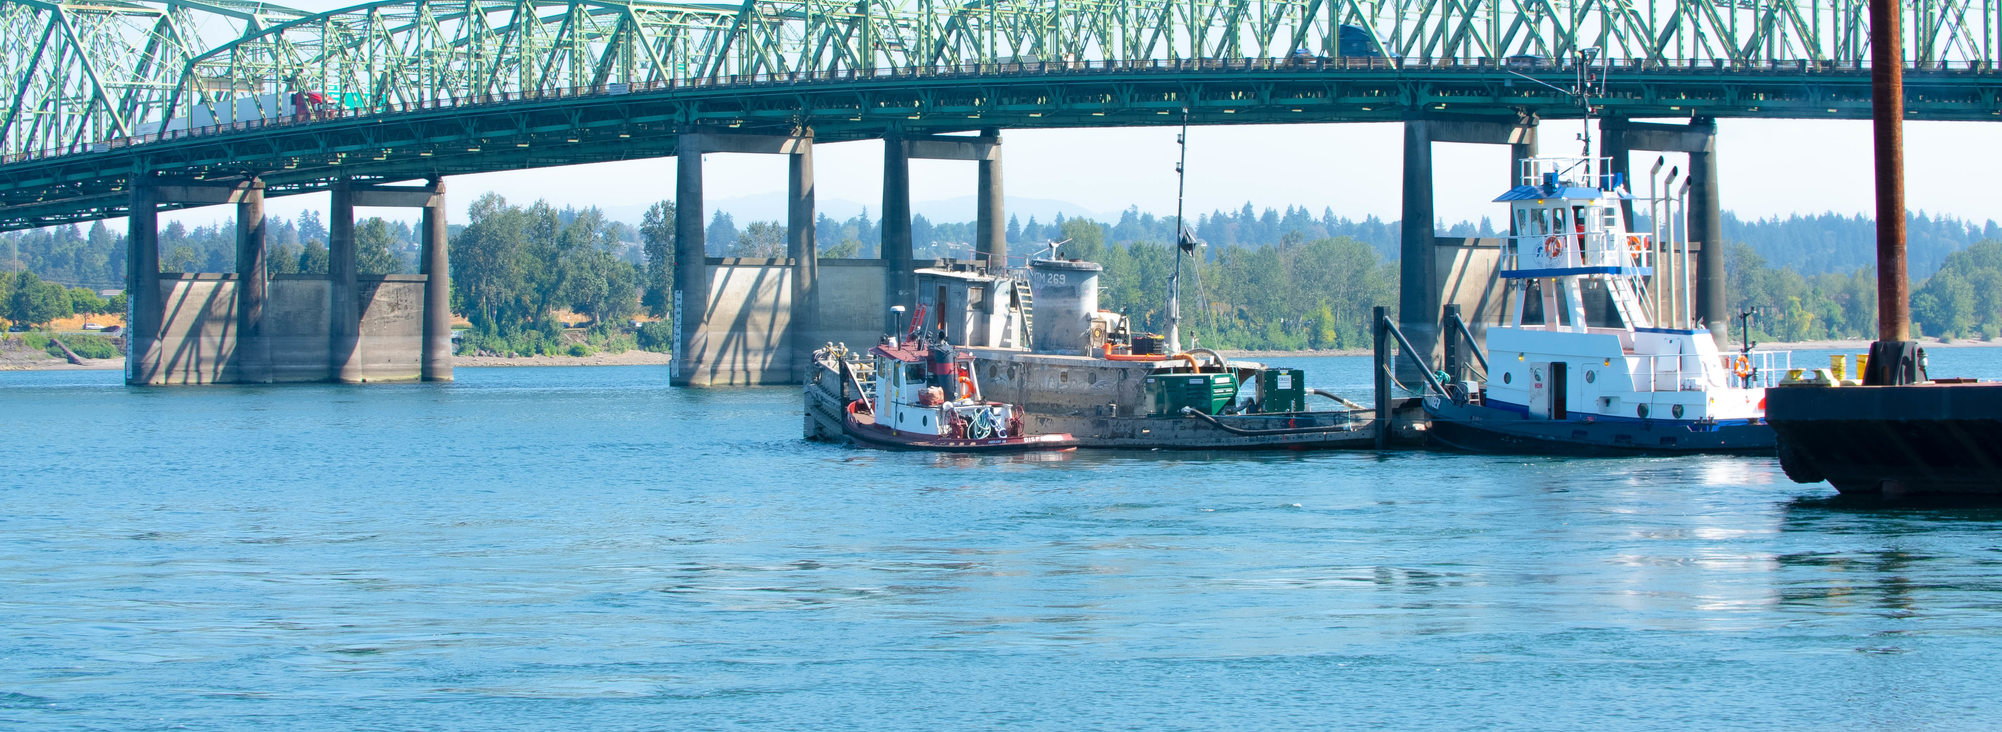 Two tugboats maneuver two derelict boats in the Columbia River, with the Interstate Bridge in the background.